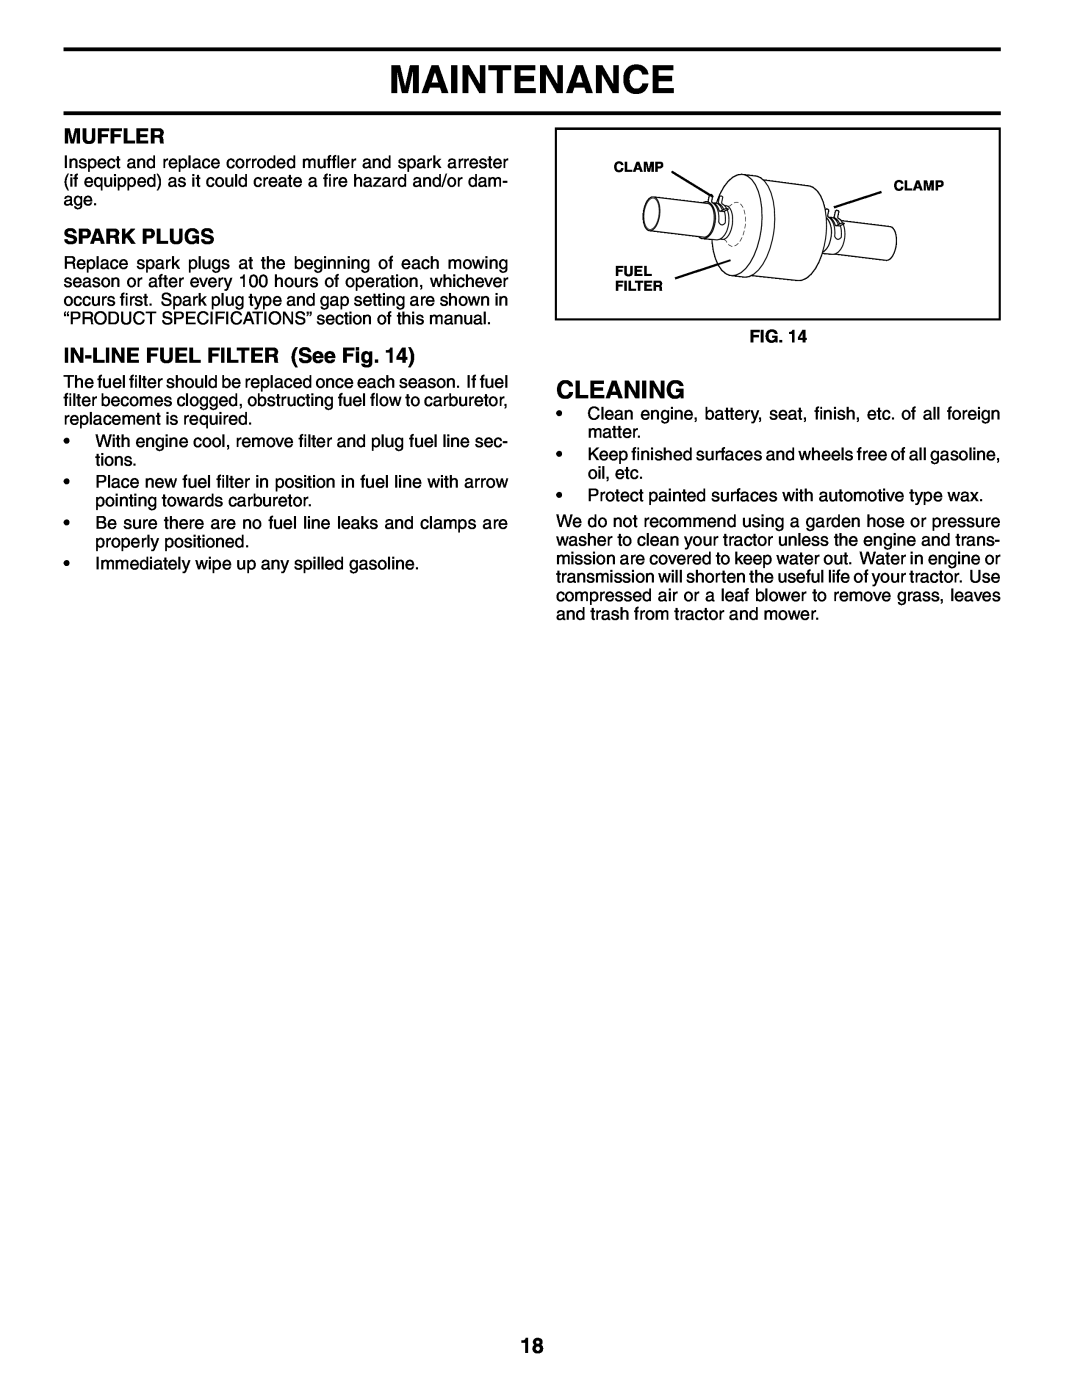 Poulan 954570932, 186888 manual Cleaning, Muffler, Spark Plugs, IN-LINE FUEL FILTER See Fig, Maintenance 